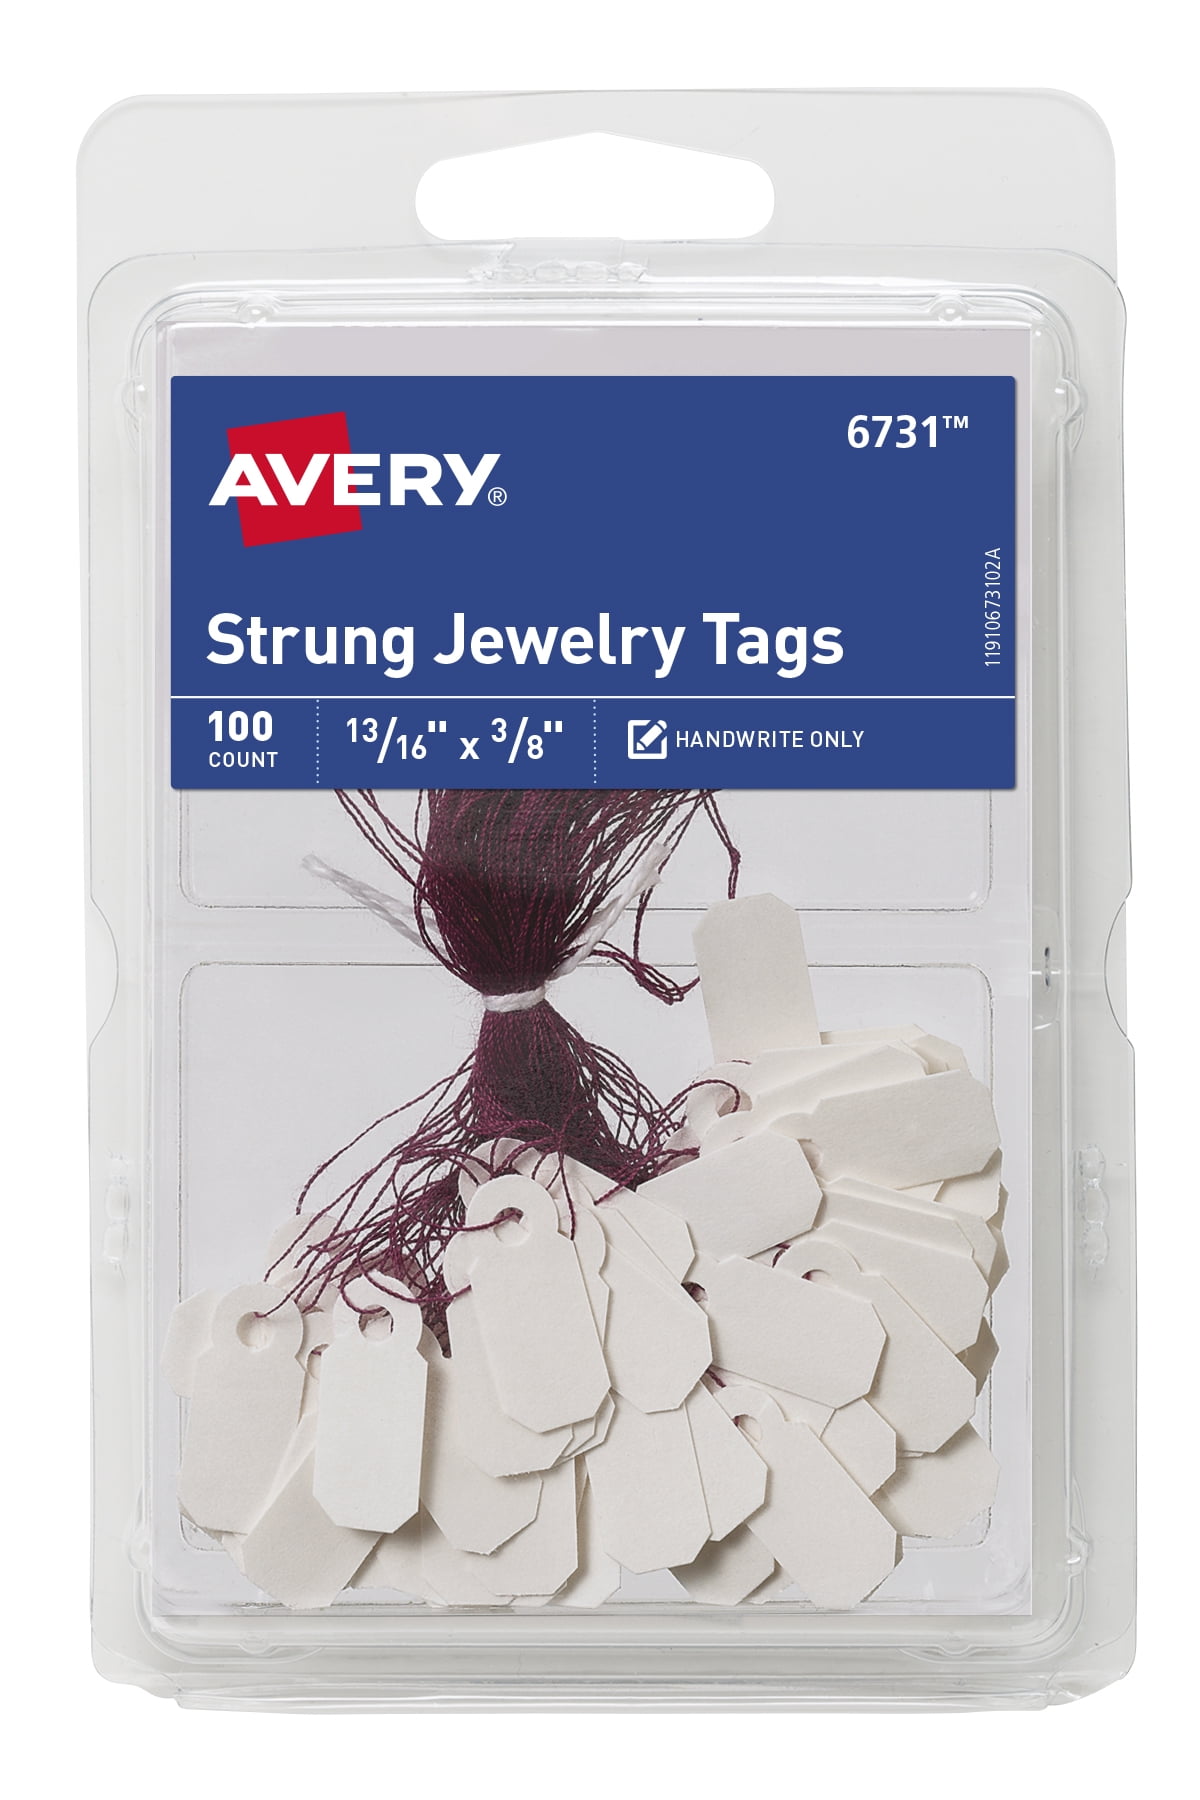 High quality Jewelry Price Tags come pre-strung for ease of use. - Jewelry  Tags are made of high quality white cardstock.-Perfectly sized to price